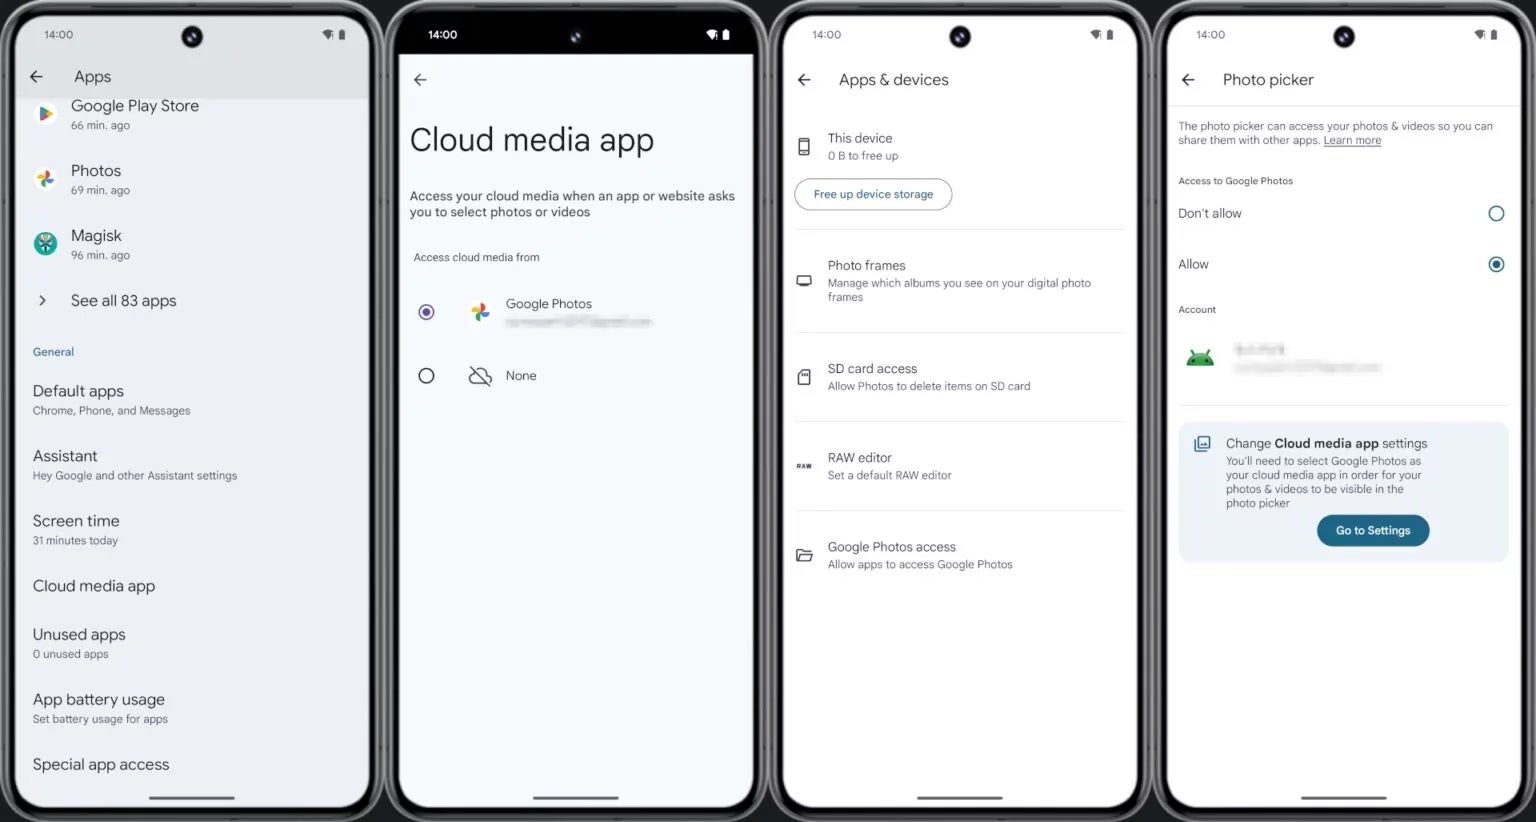 Google Photos is set up as a cloud media provider for Android's photo picker |  Source - Android Authority - Google Photos media could soon be accessible via Android's new photo picker